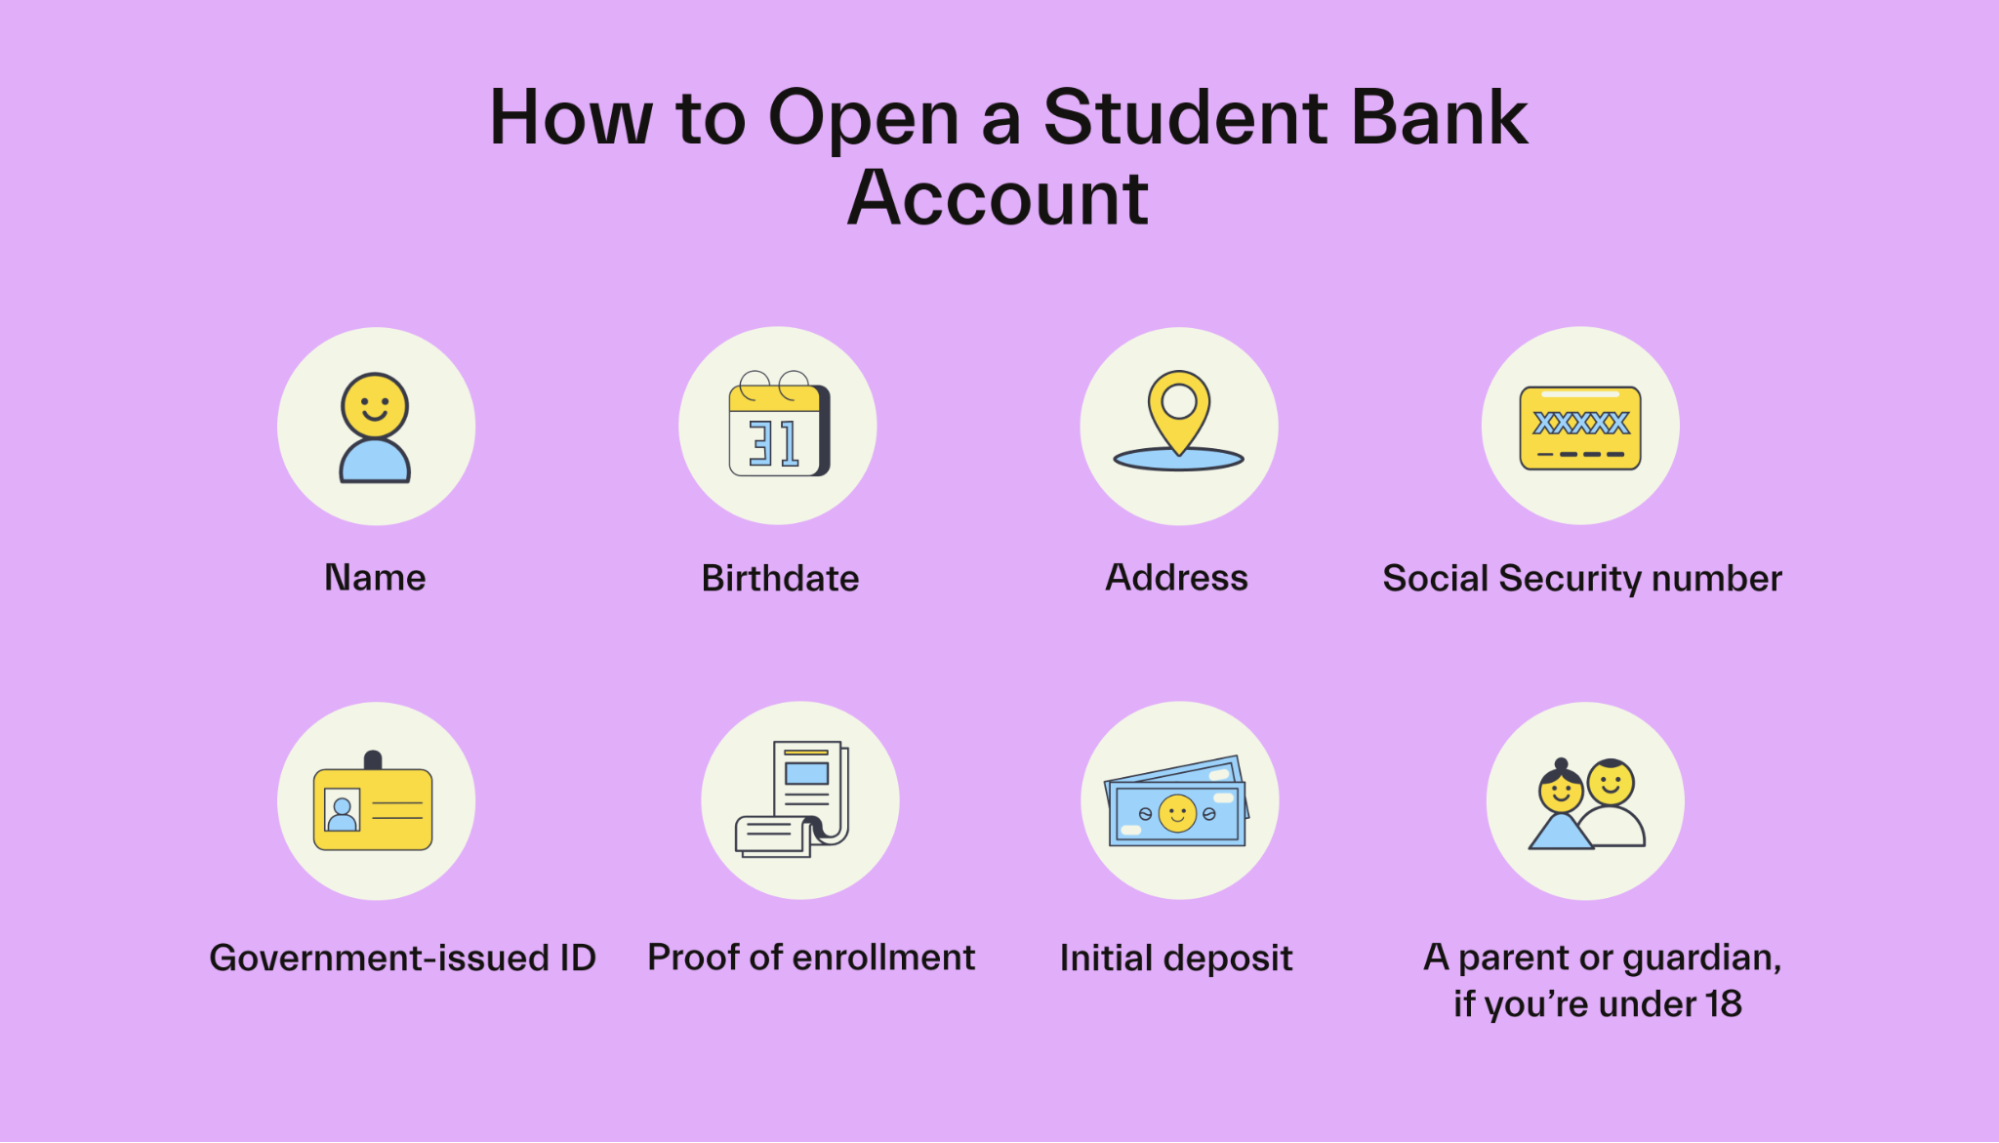 How to Open a Student Bank Account